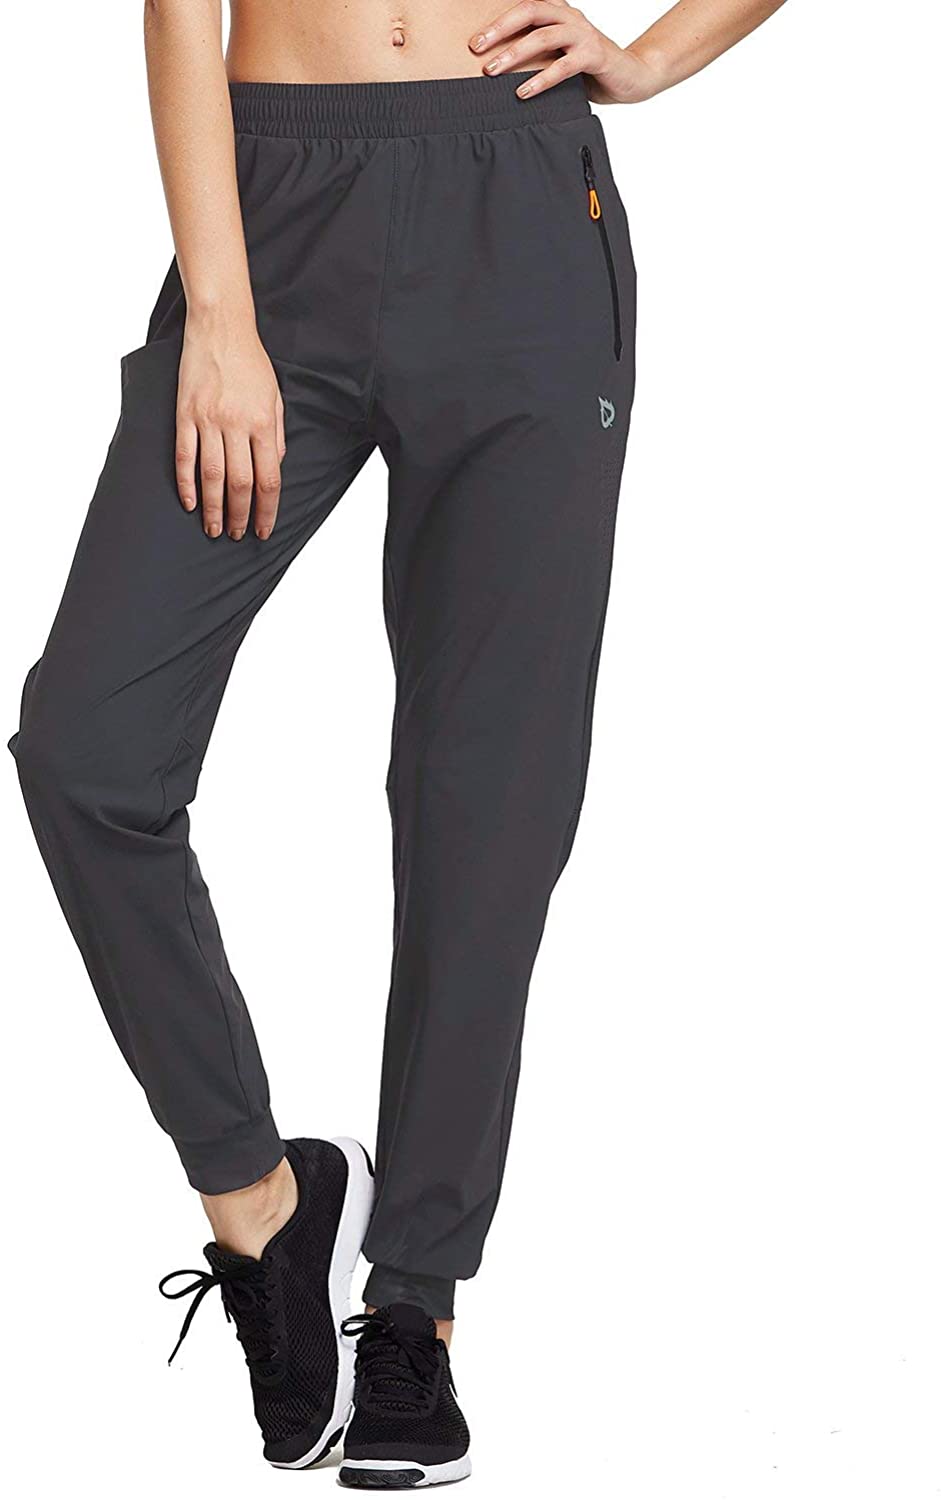 Adult Performance Sweatpants with Sides Zippers Pockets  Zippers Legs Ends   Speciencom